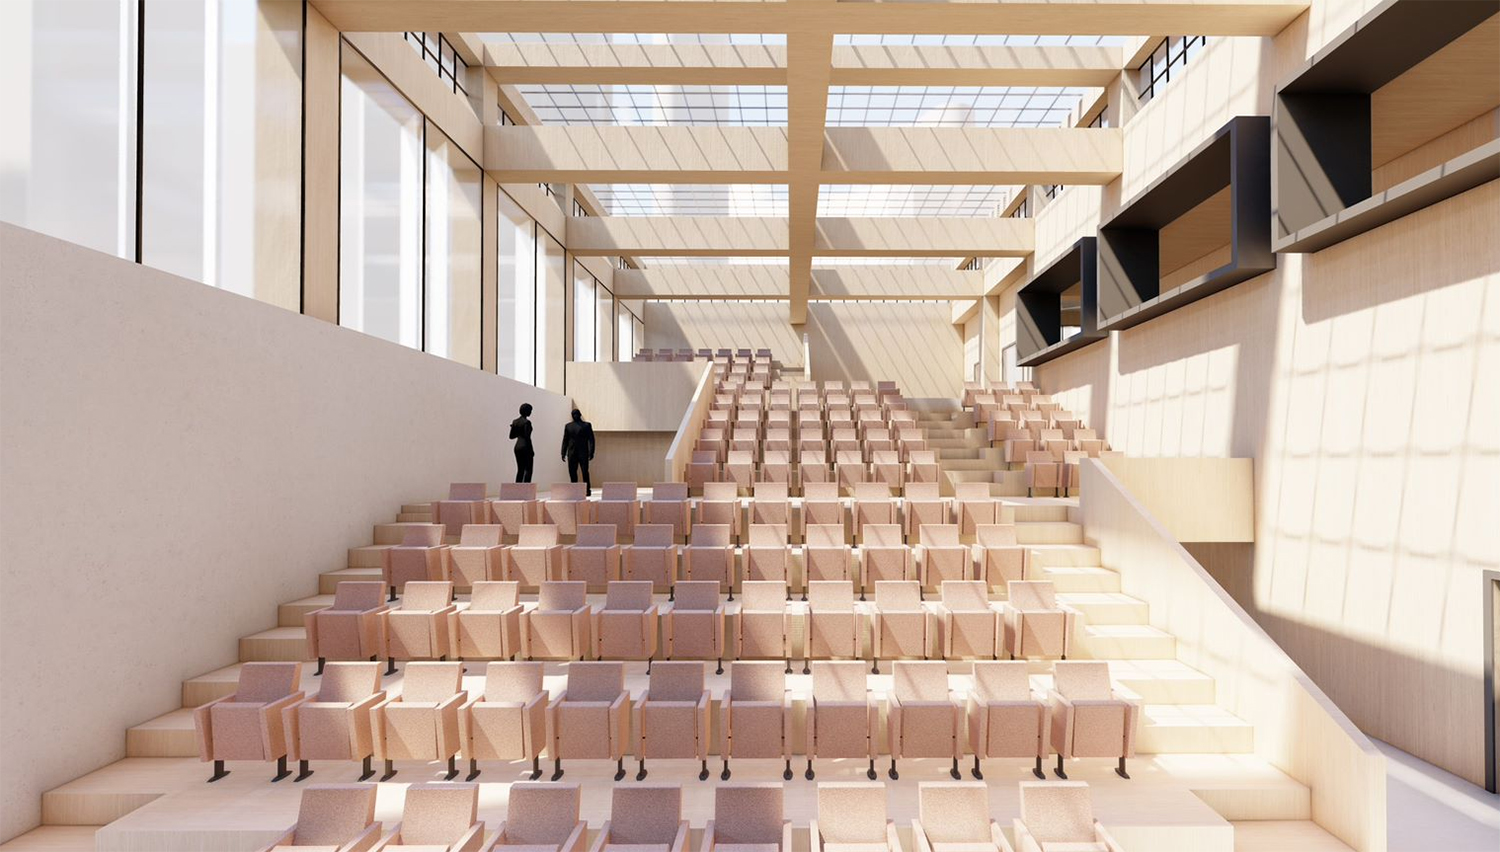 The auditorium in full - visually showing the CLT features and informal discussion spaces. 